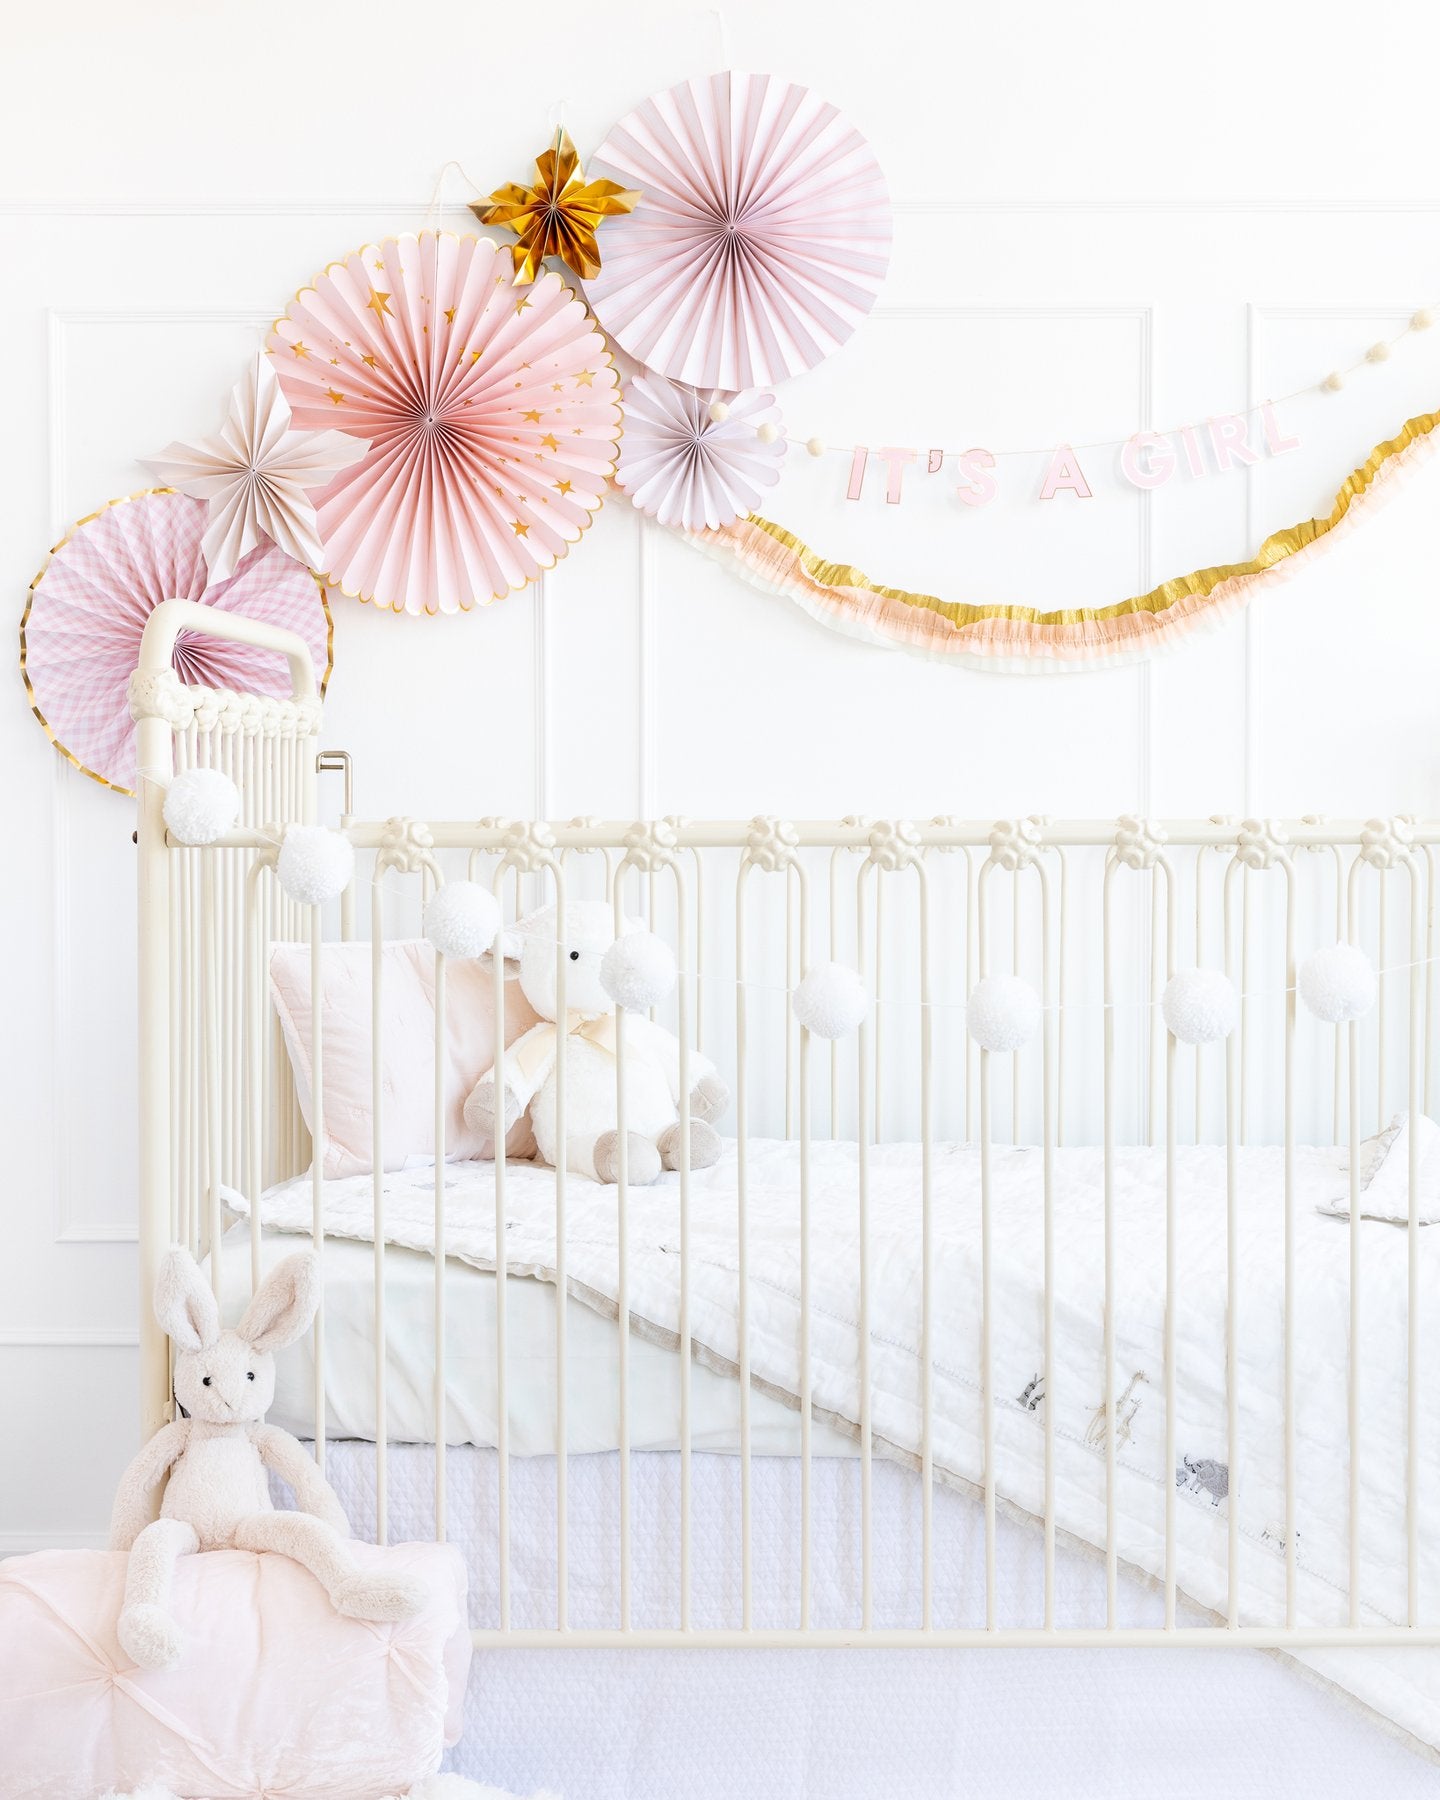 My Mind's Eye Baby Pink Fans with different sizes and shape hanging above white baby cot